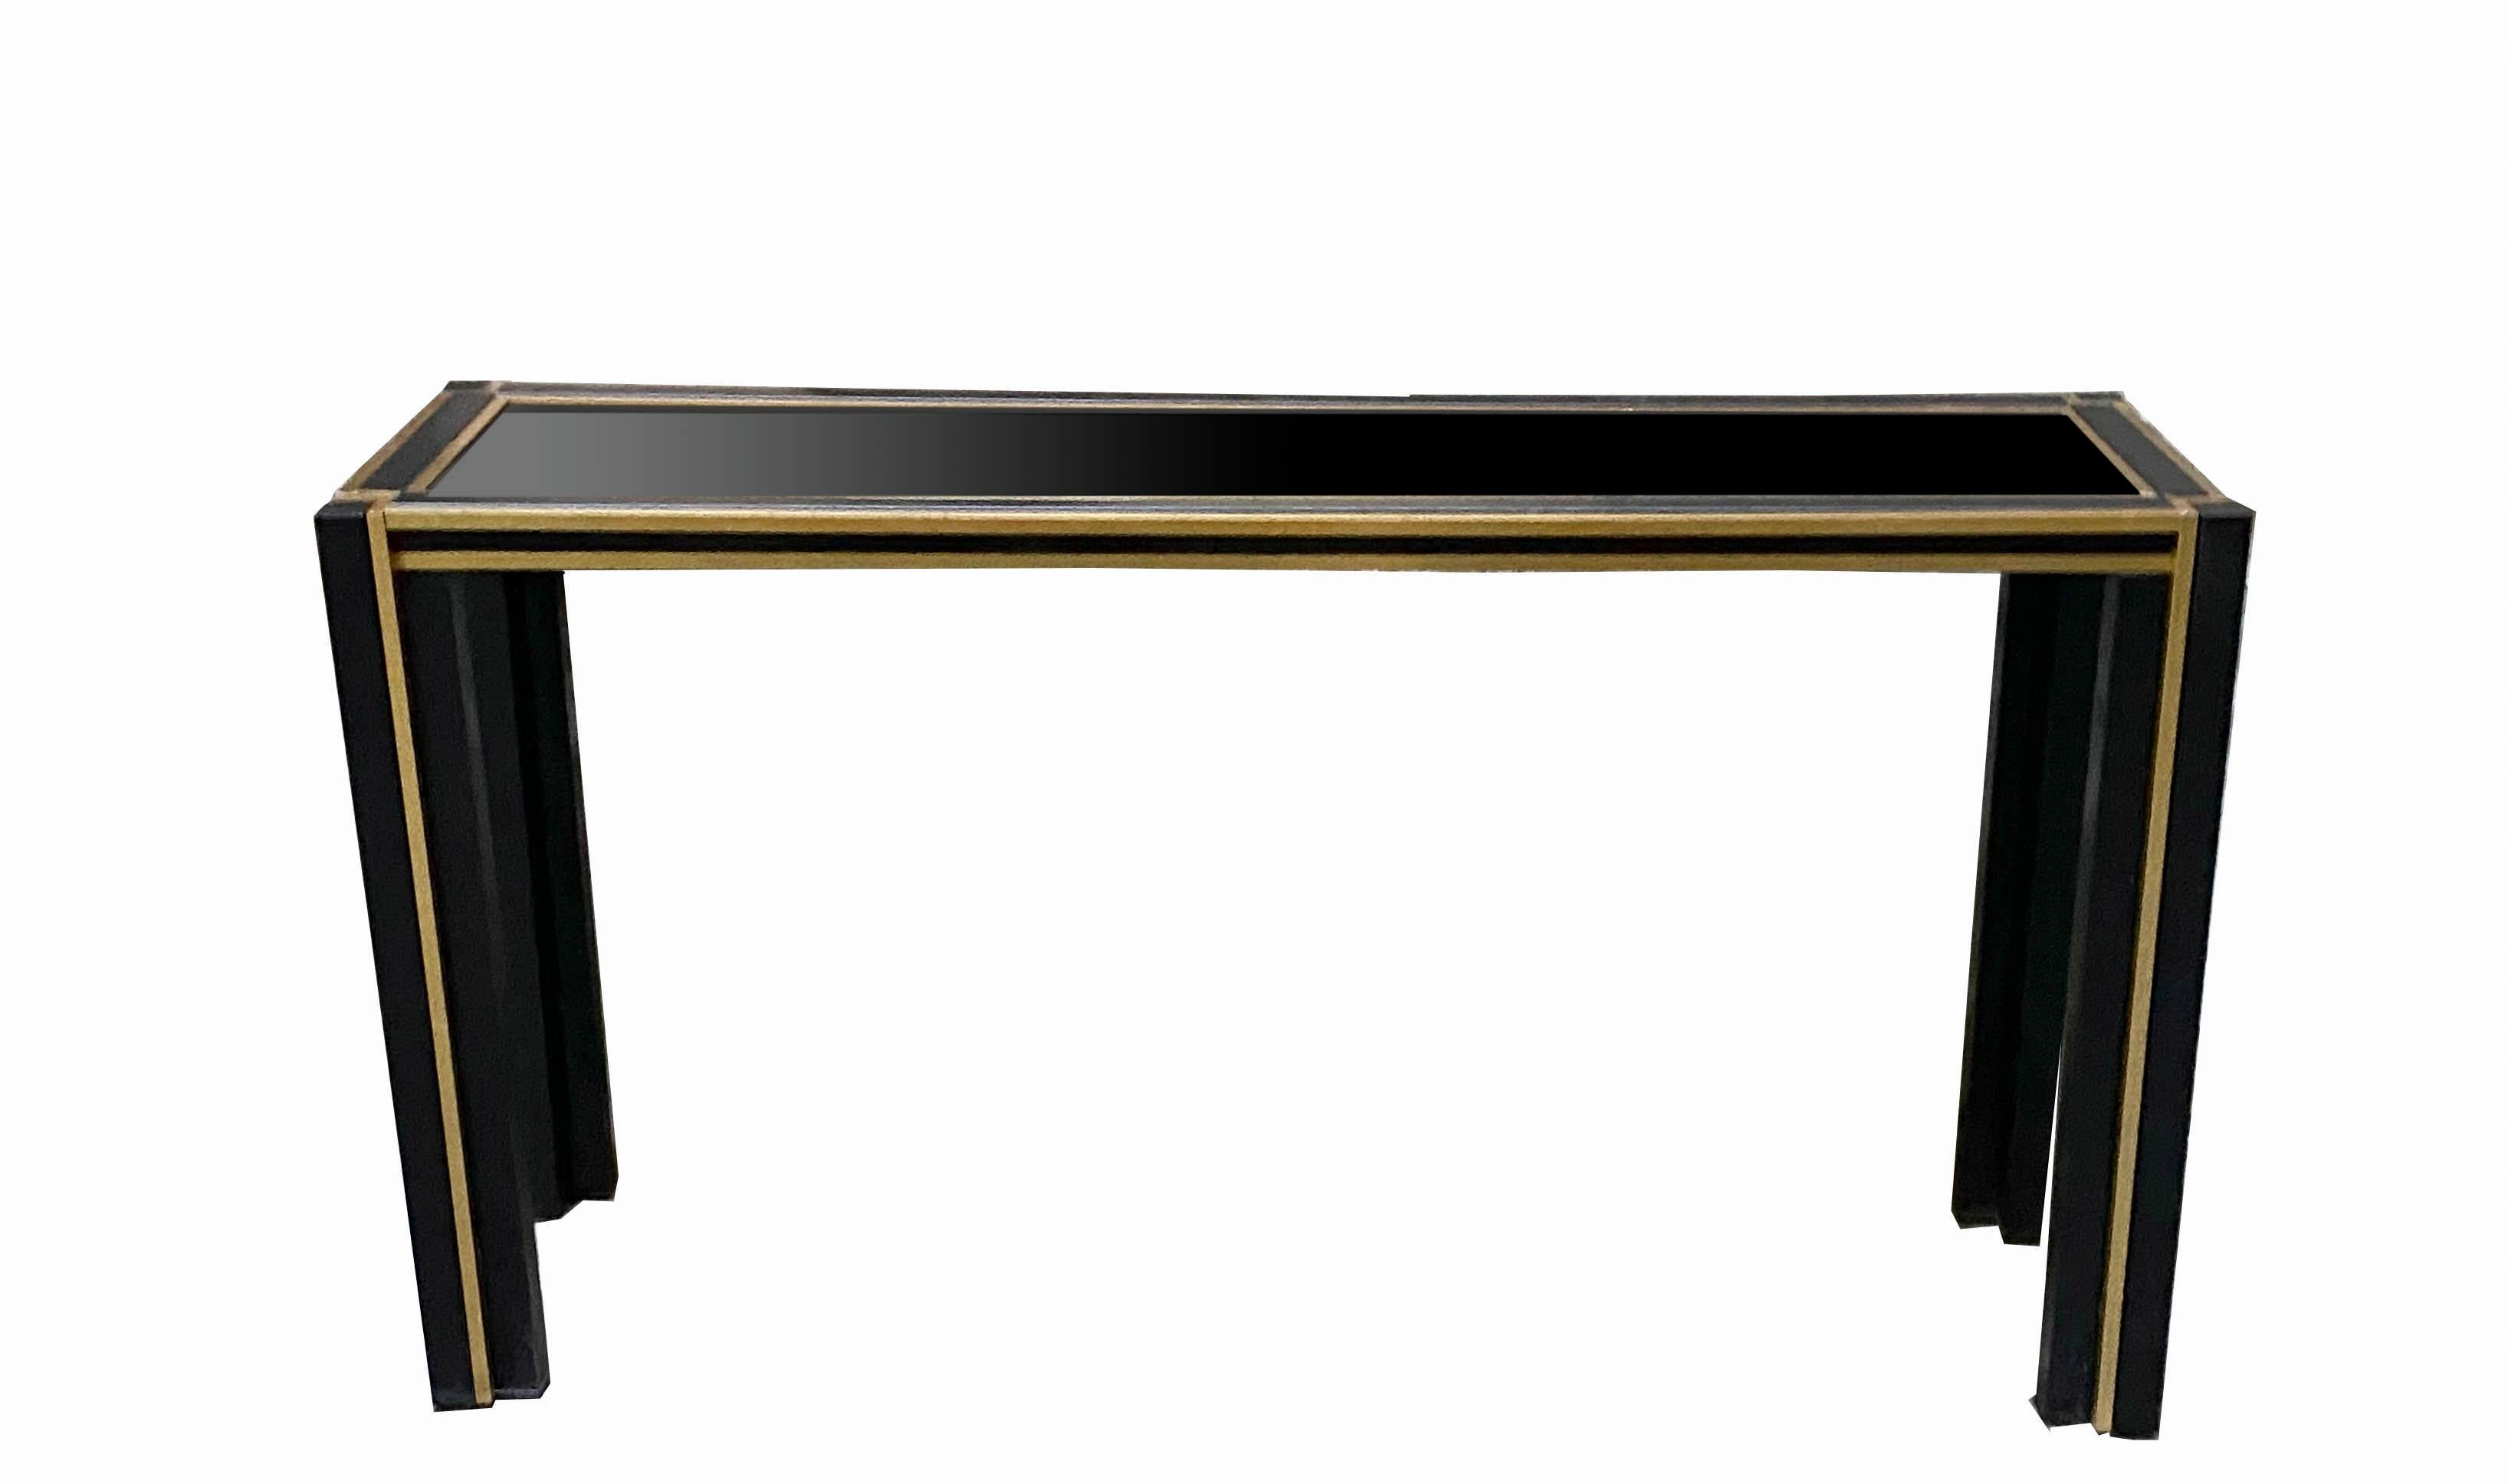 A fantastic and rare Italian console table by Renato Zevi, it was produced in Italy in the 1970s.
It is made from black aluminium and brass finish, has a recessed glass top and is finished on all sides. 
The condition is excellent throughout, with